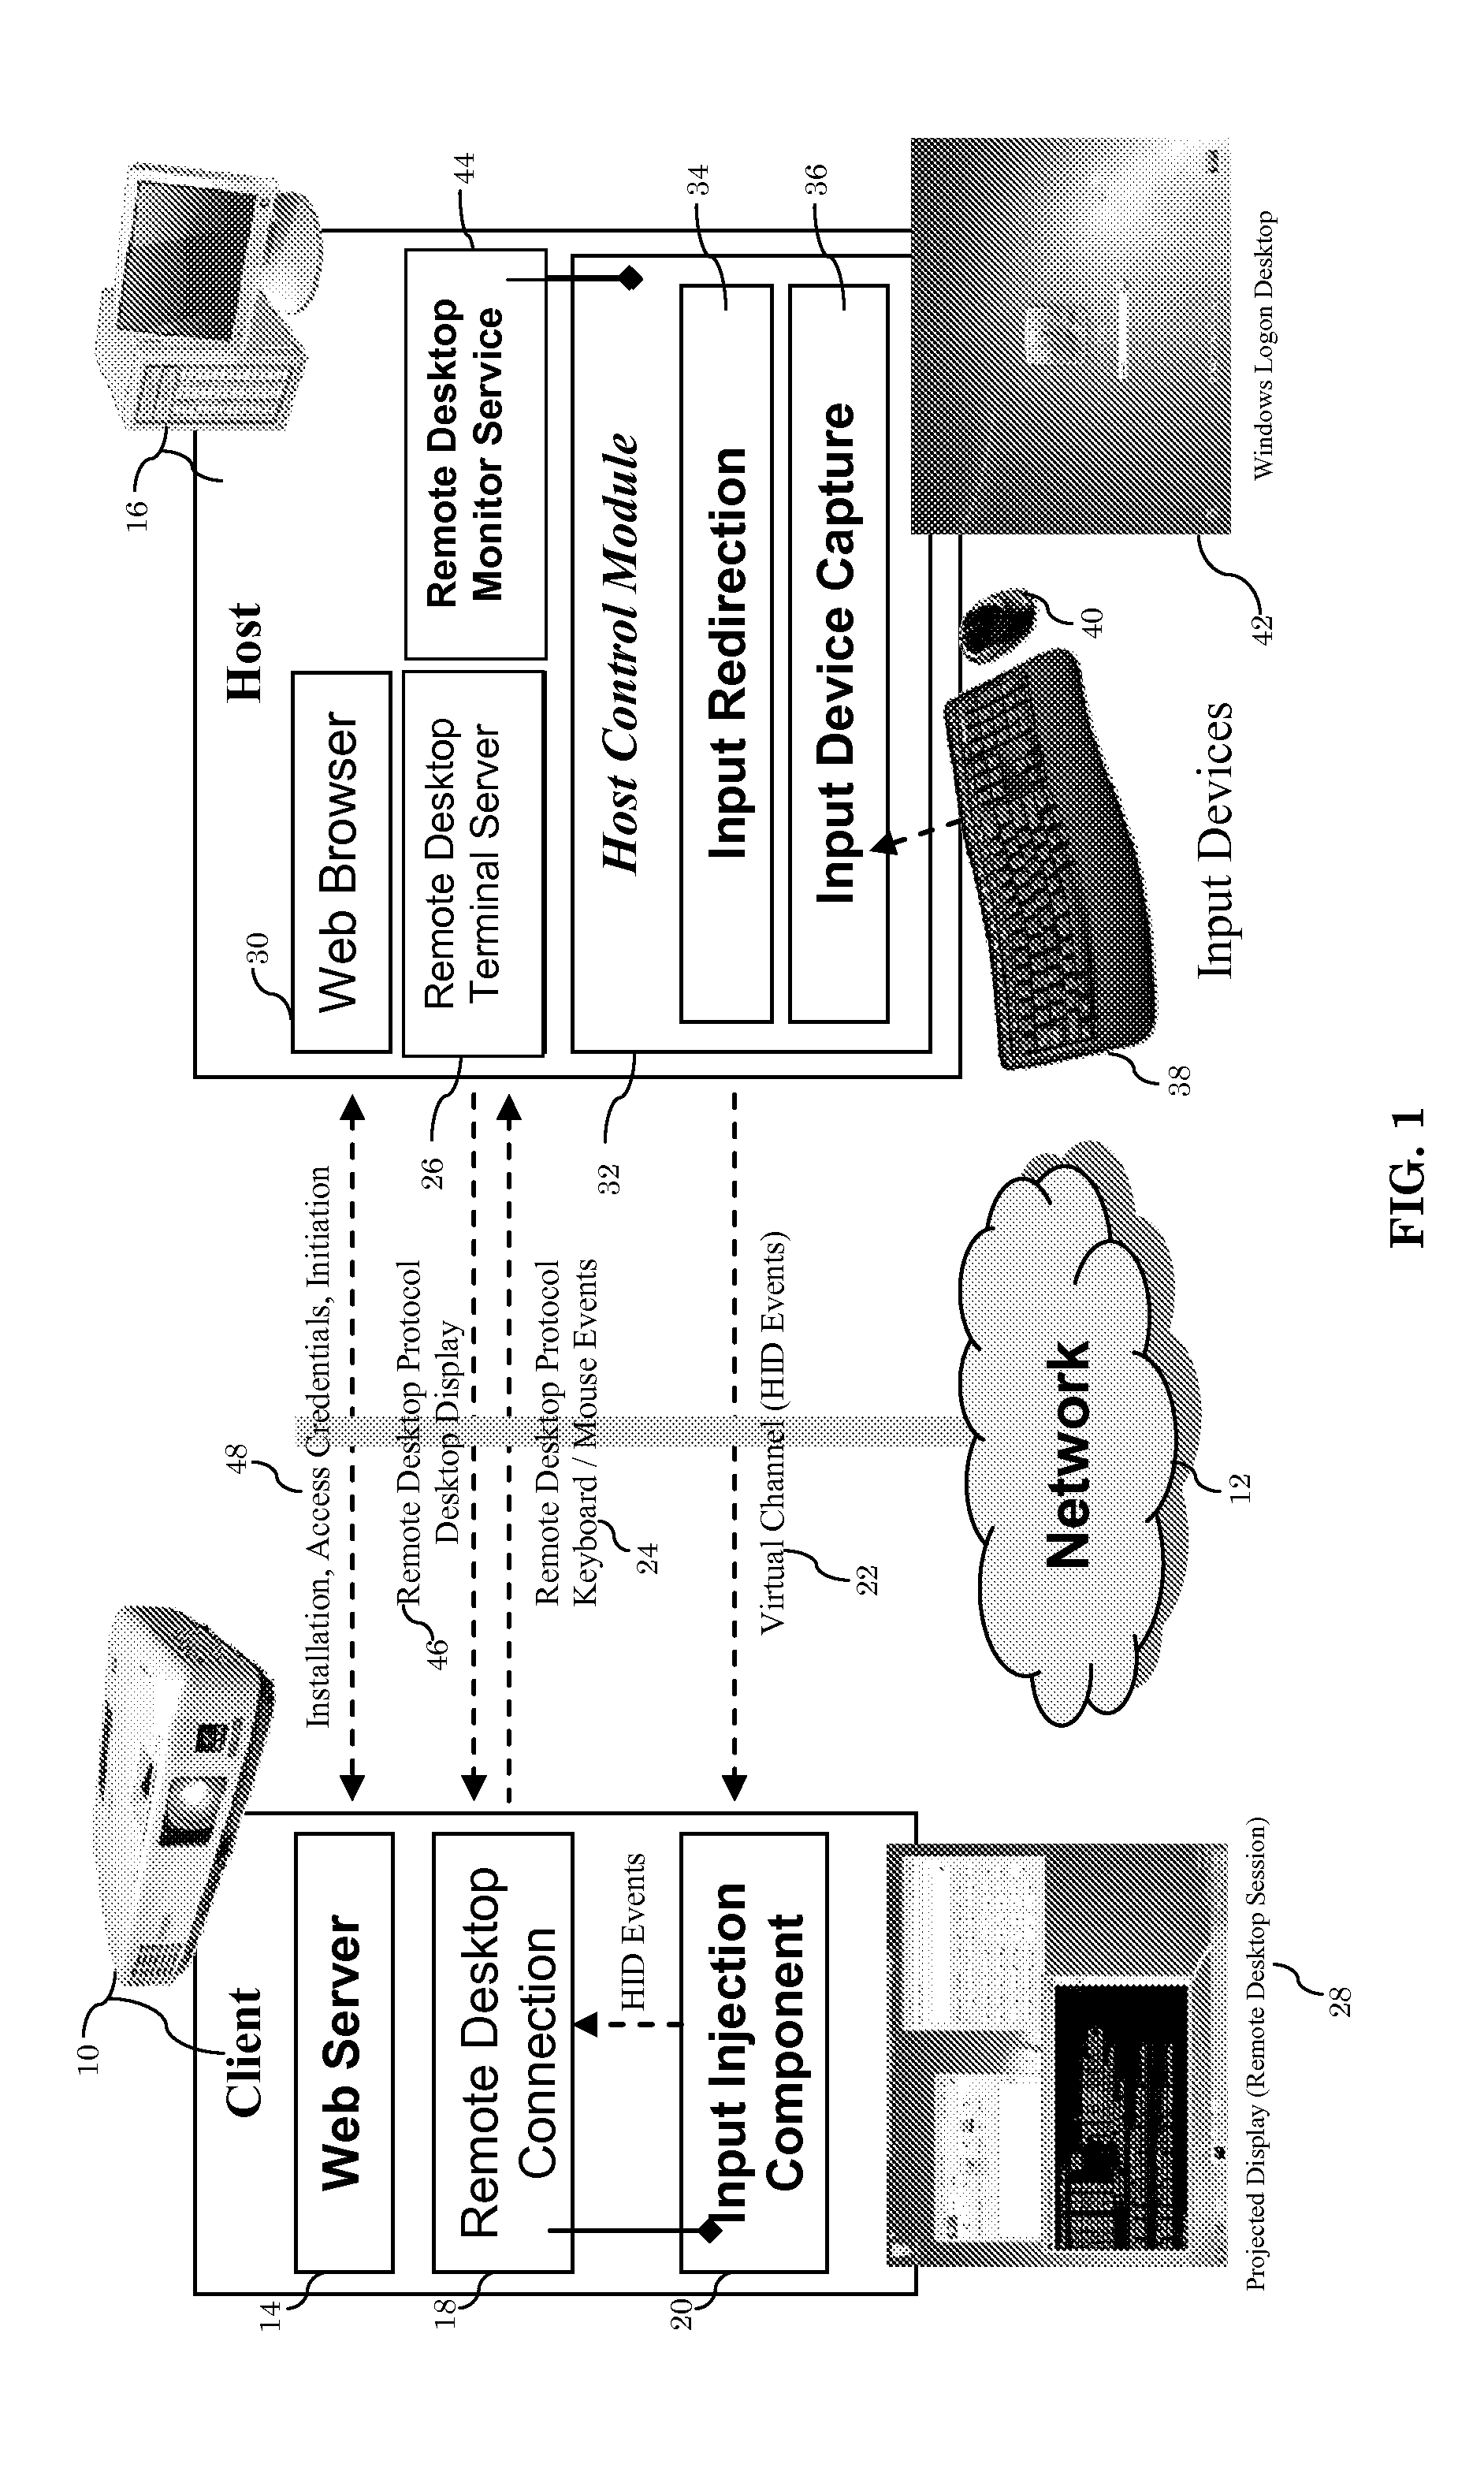 Method For Remote Desktop Control By Remote Host Input Devices